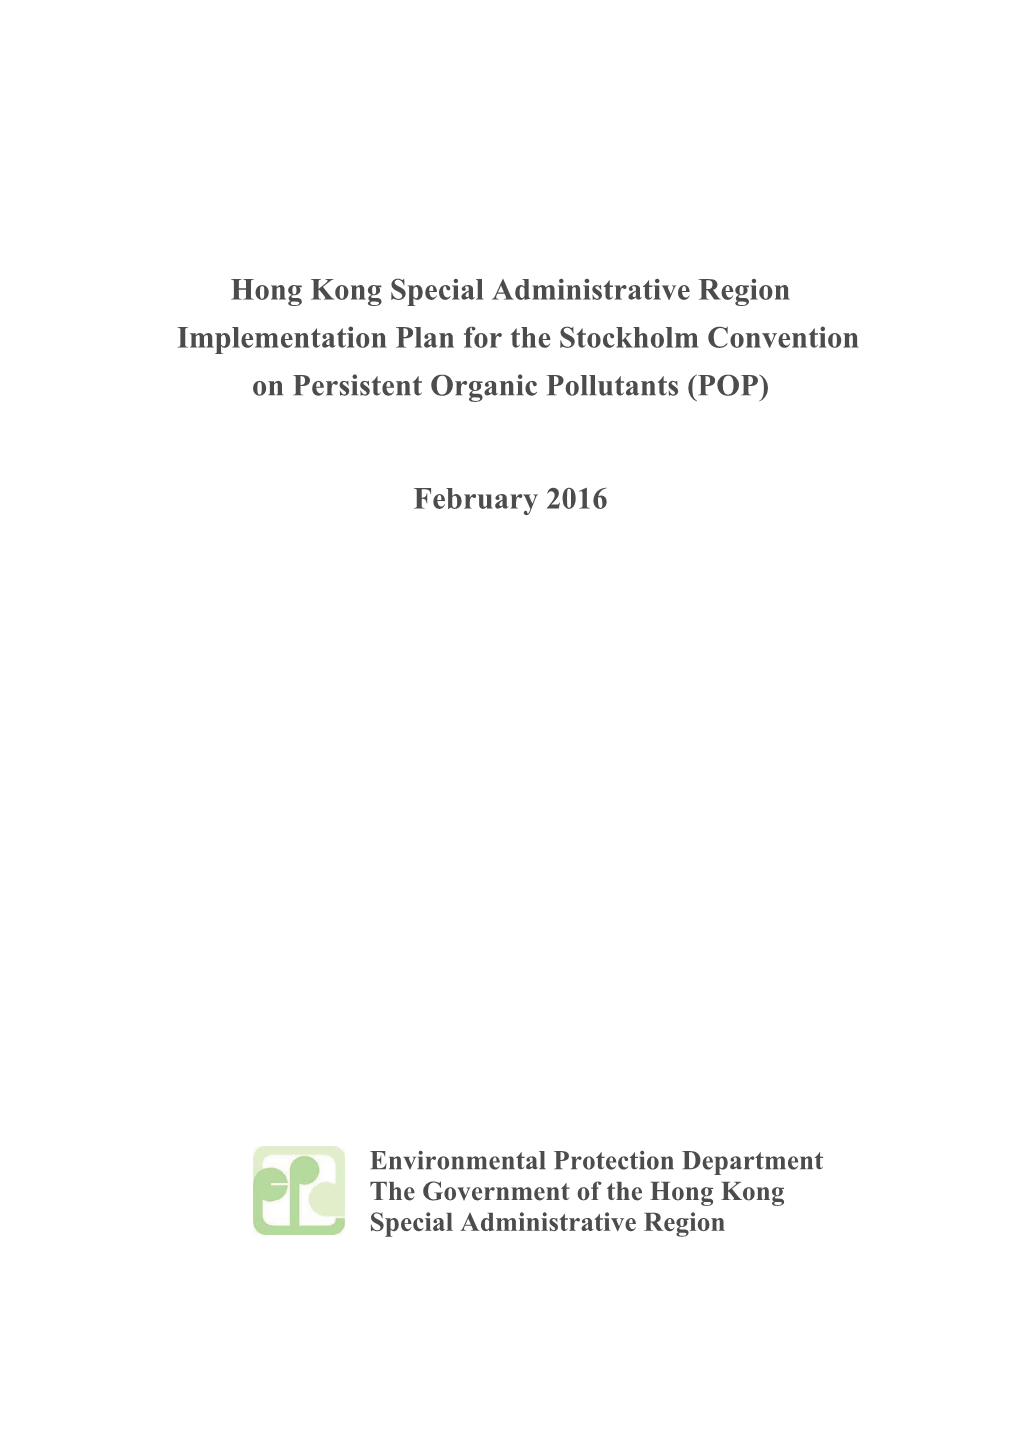 Implementation Plan for the Stockholm Convention on Persistent Organic Pollutants (POP)